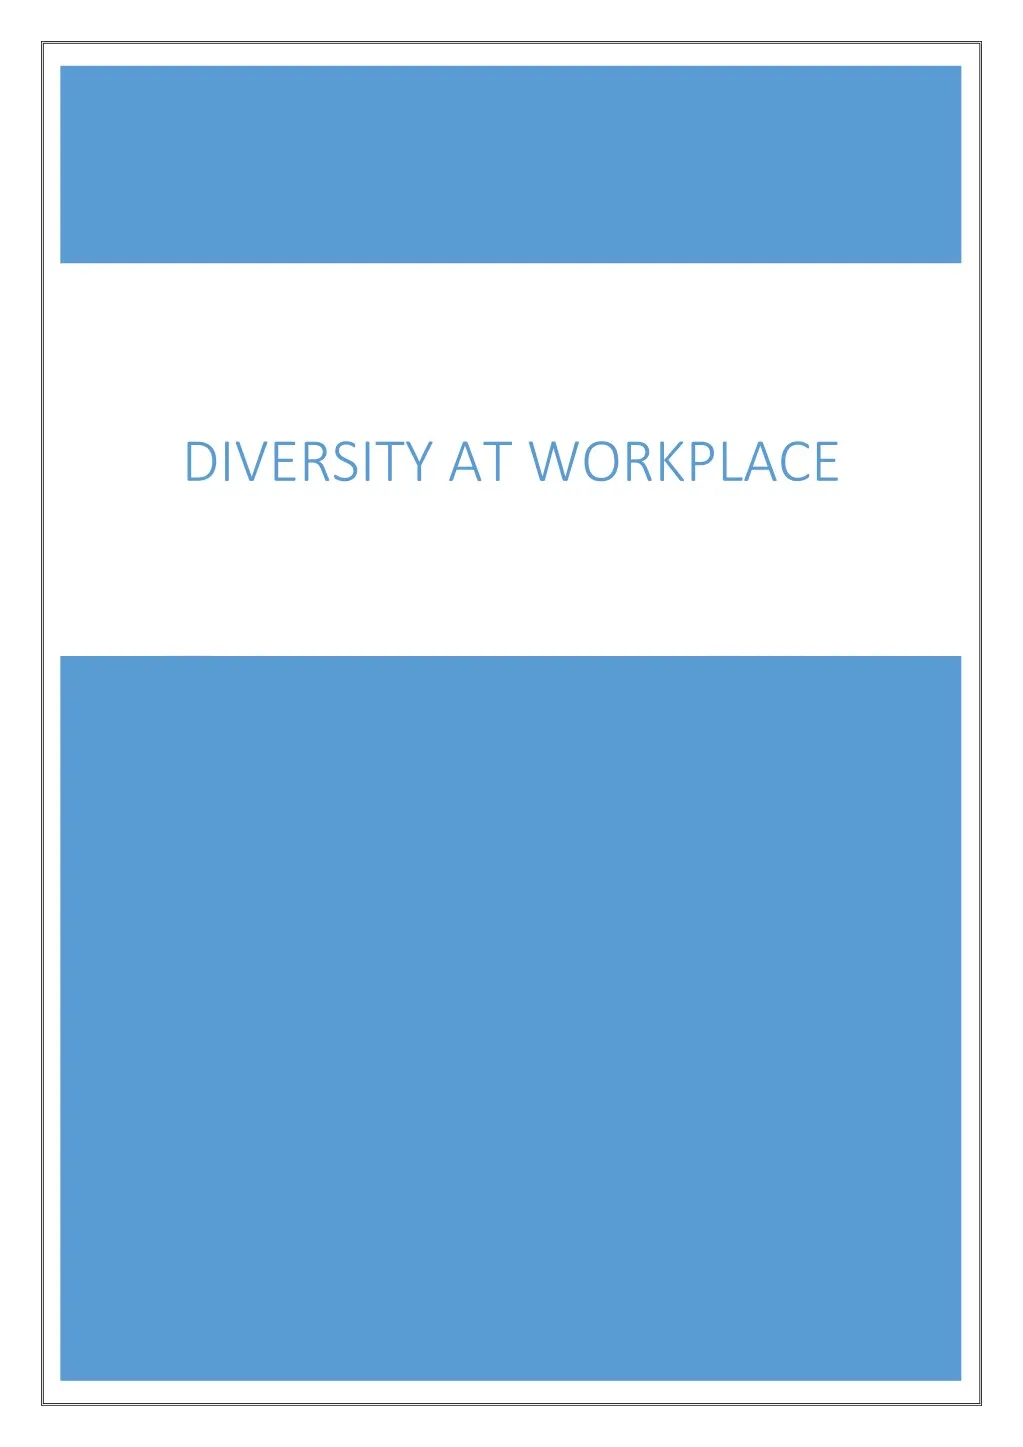 diversity at workplace